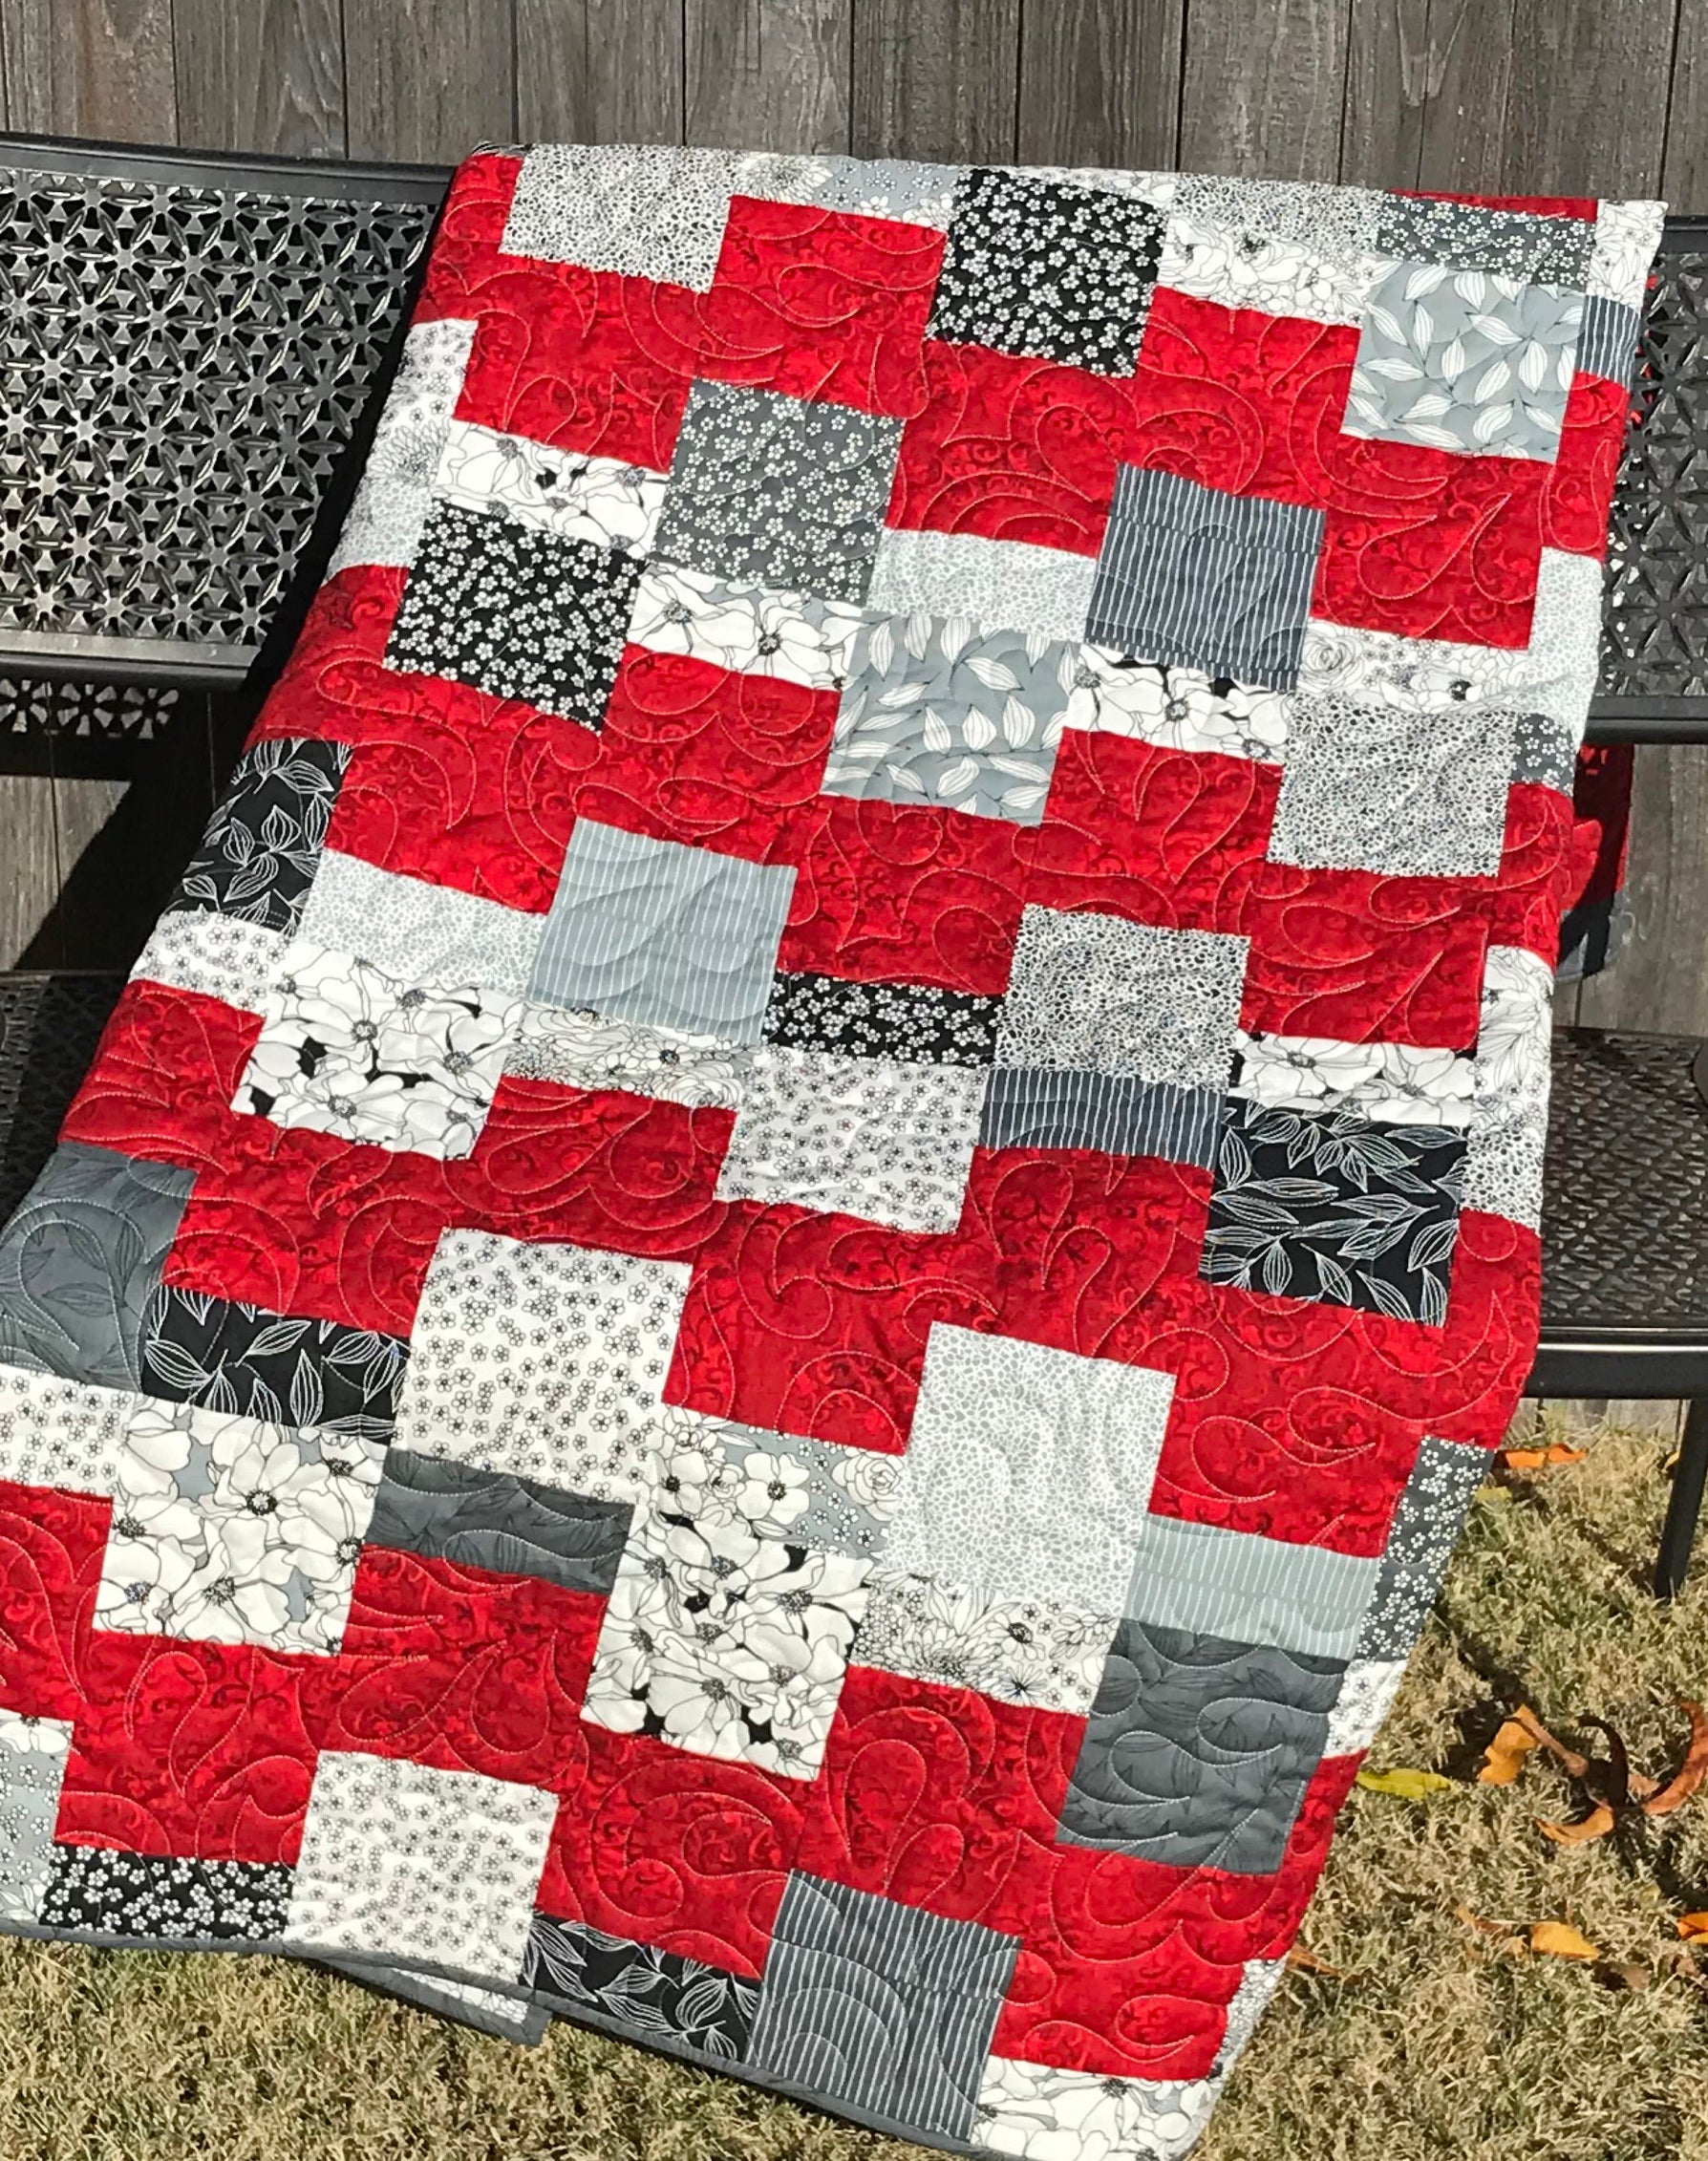 Stair Steppin' Quilt Pattern in Four Size Options - Digital Quilt Pattern - Handmade Quilts, Digital Patterns, and Home Décor items online - Cuddle Cat Quiltworks